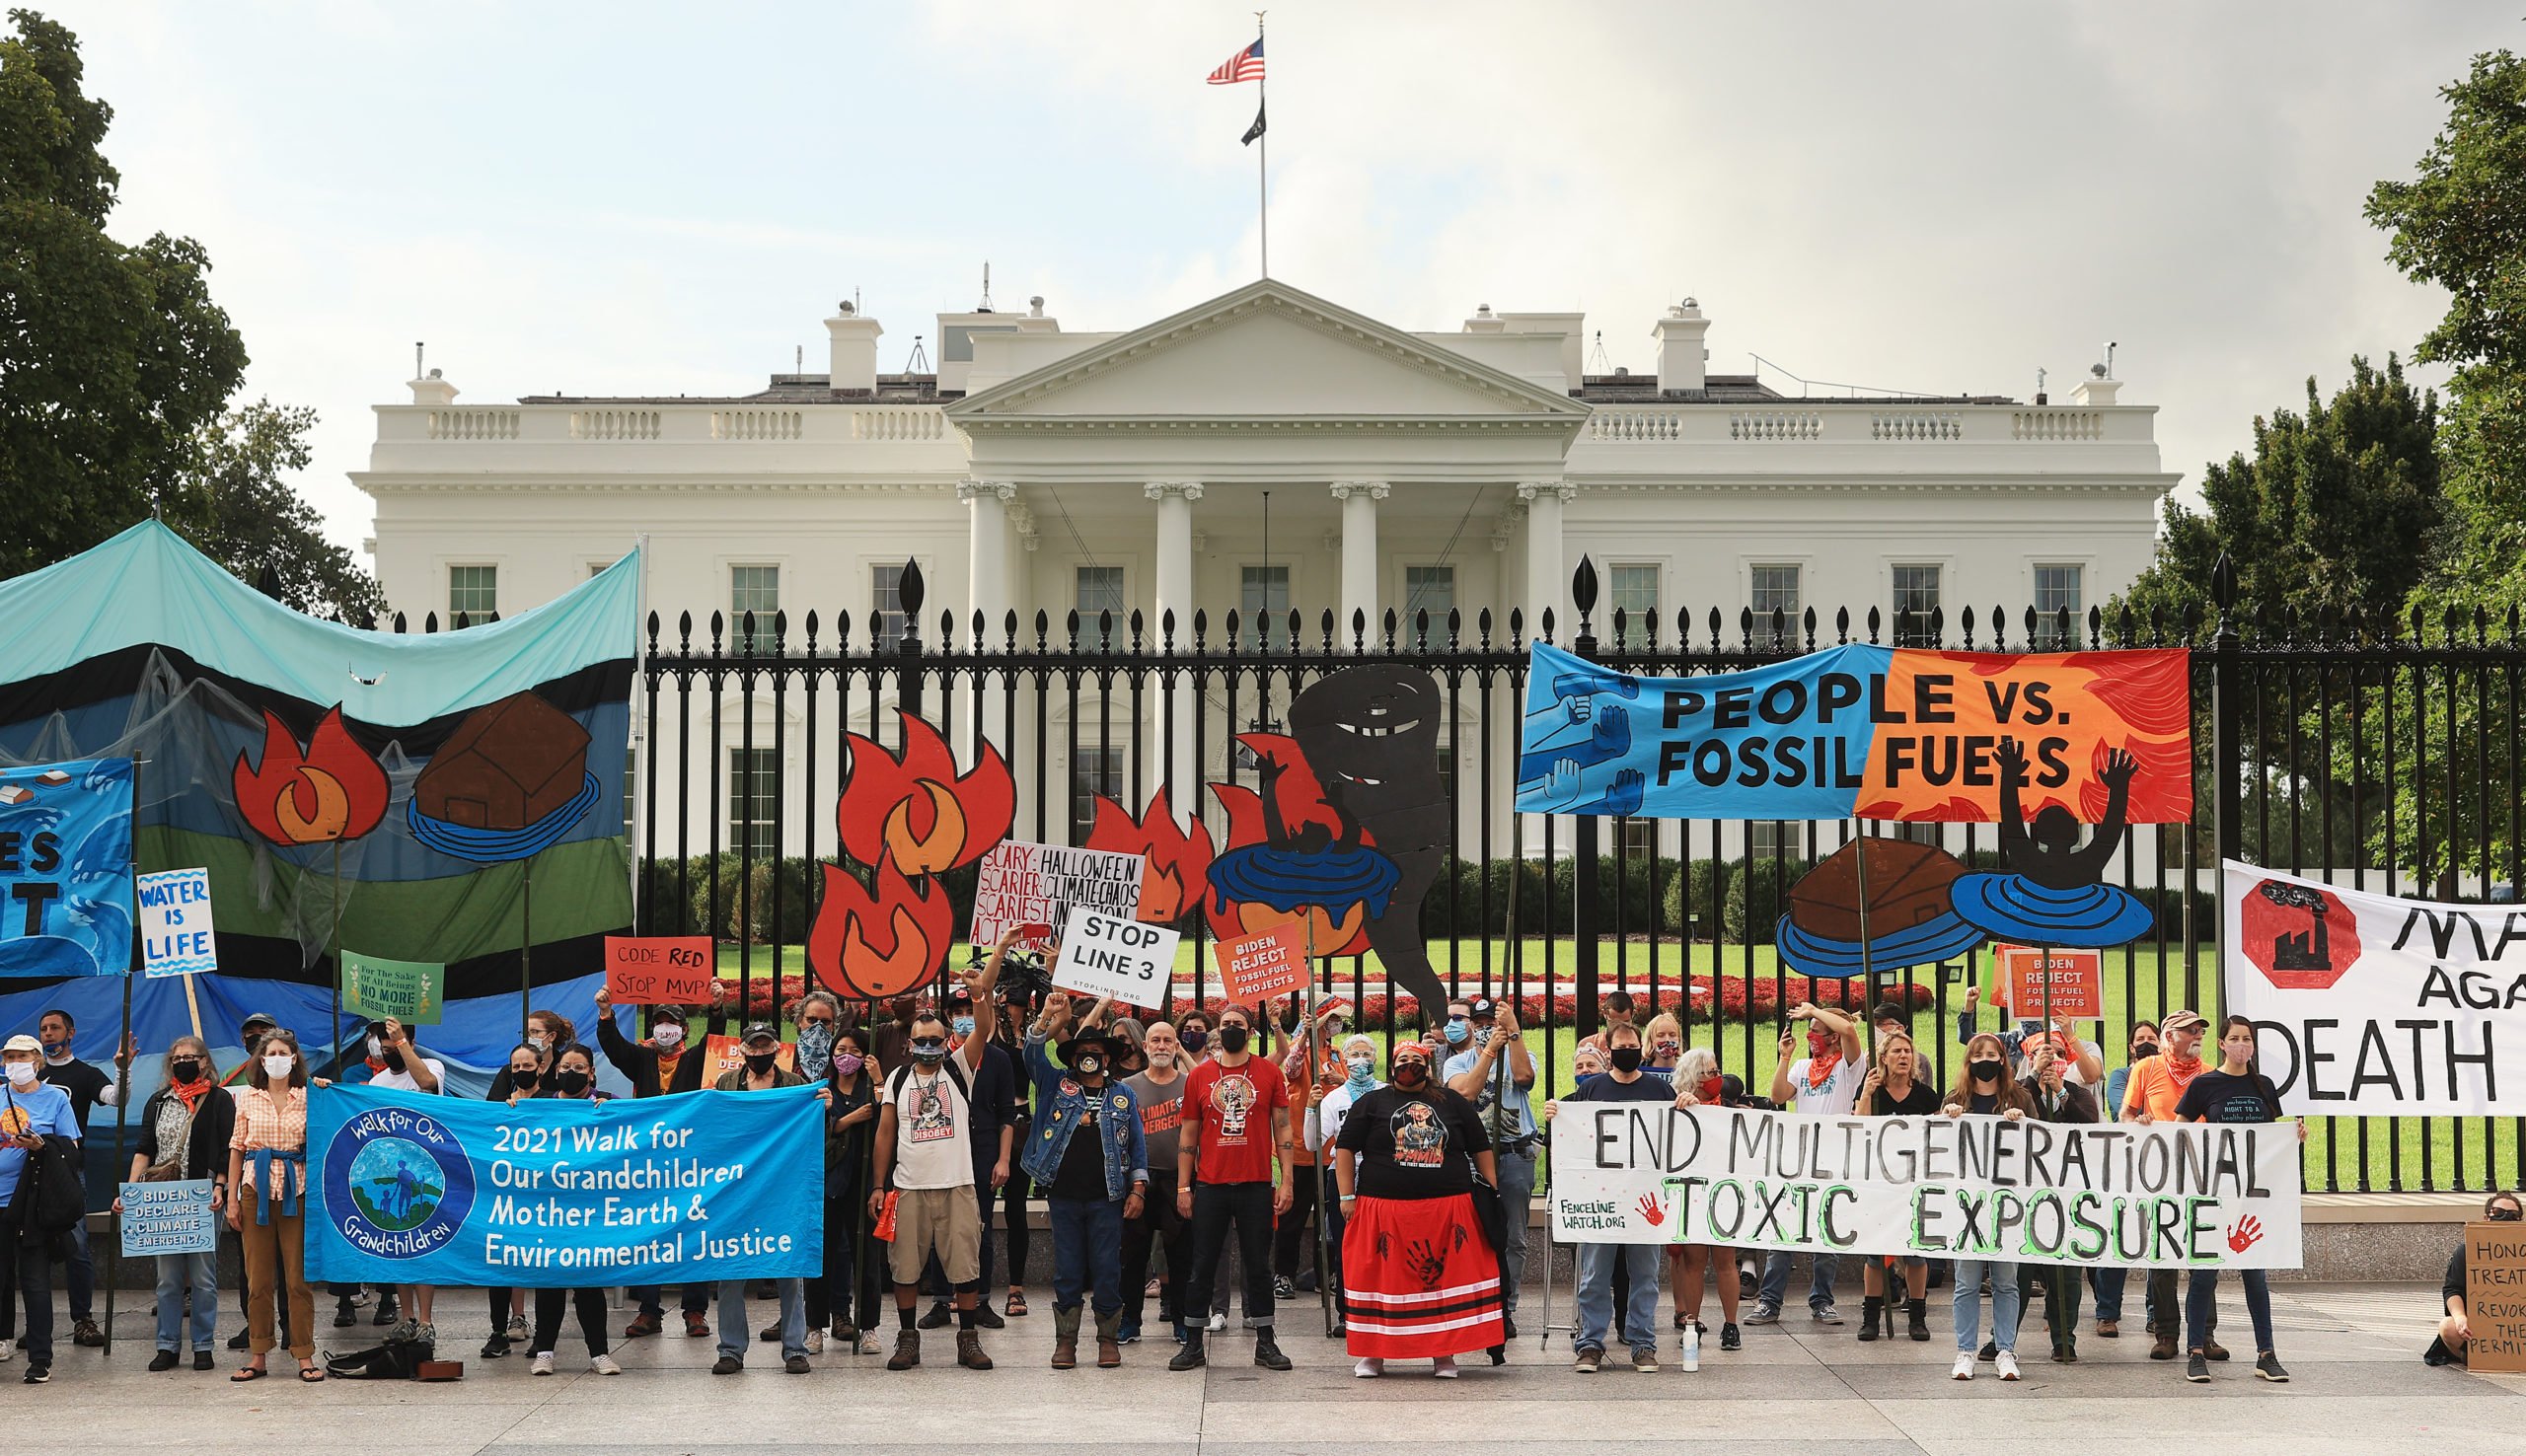 Demonstrators rally outside the White House as part of the 'Climate Chaos Is Happening Now' protest on Oct. 13. (Chip Somodevilla/Getty Images)